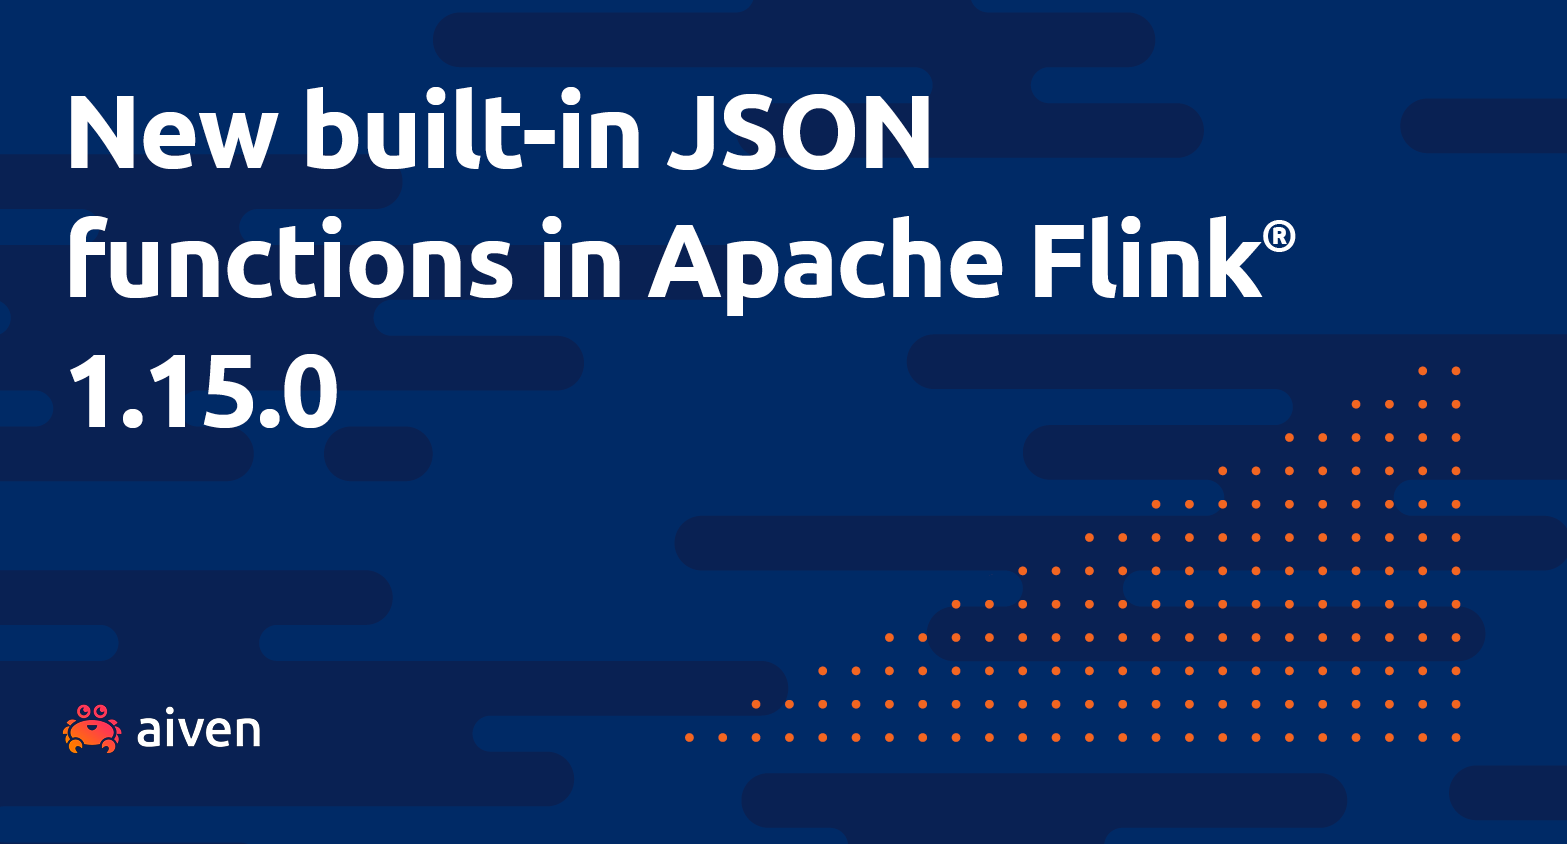 Looking ahead to the new JSON SQL functions in Apache Flink® 1.15.0 illustration